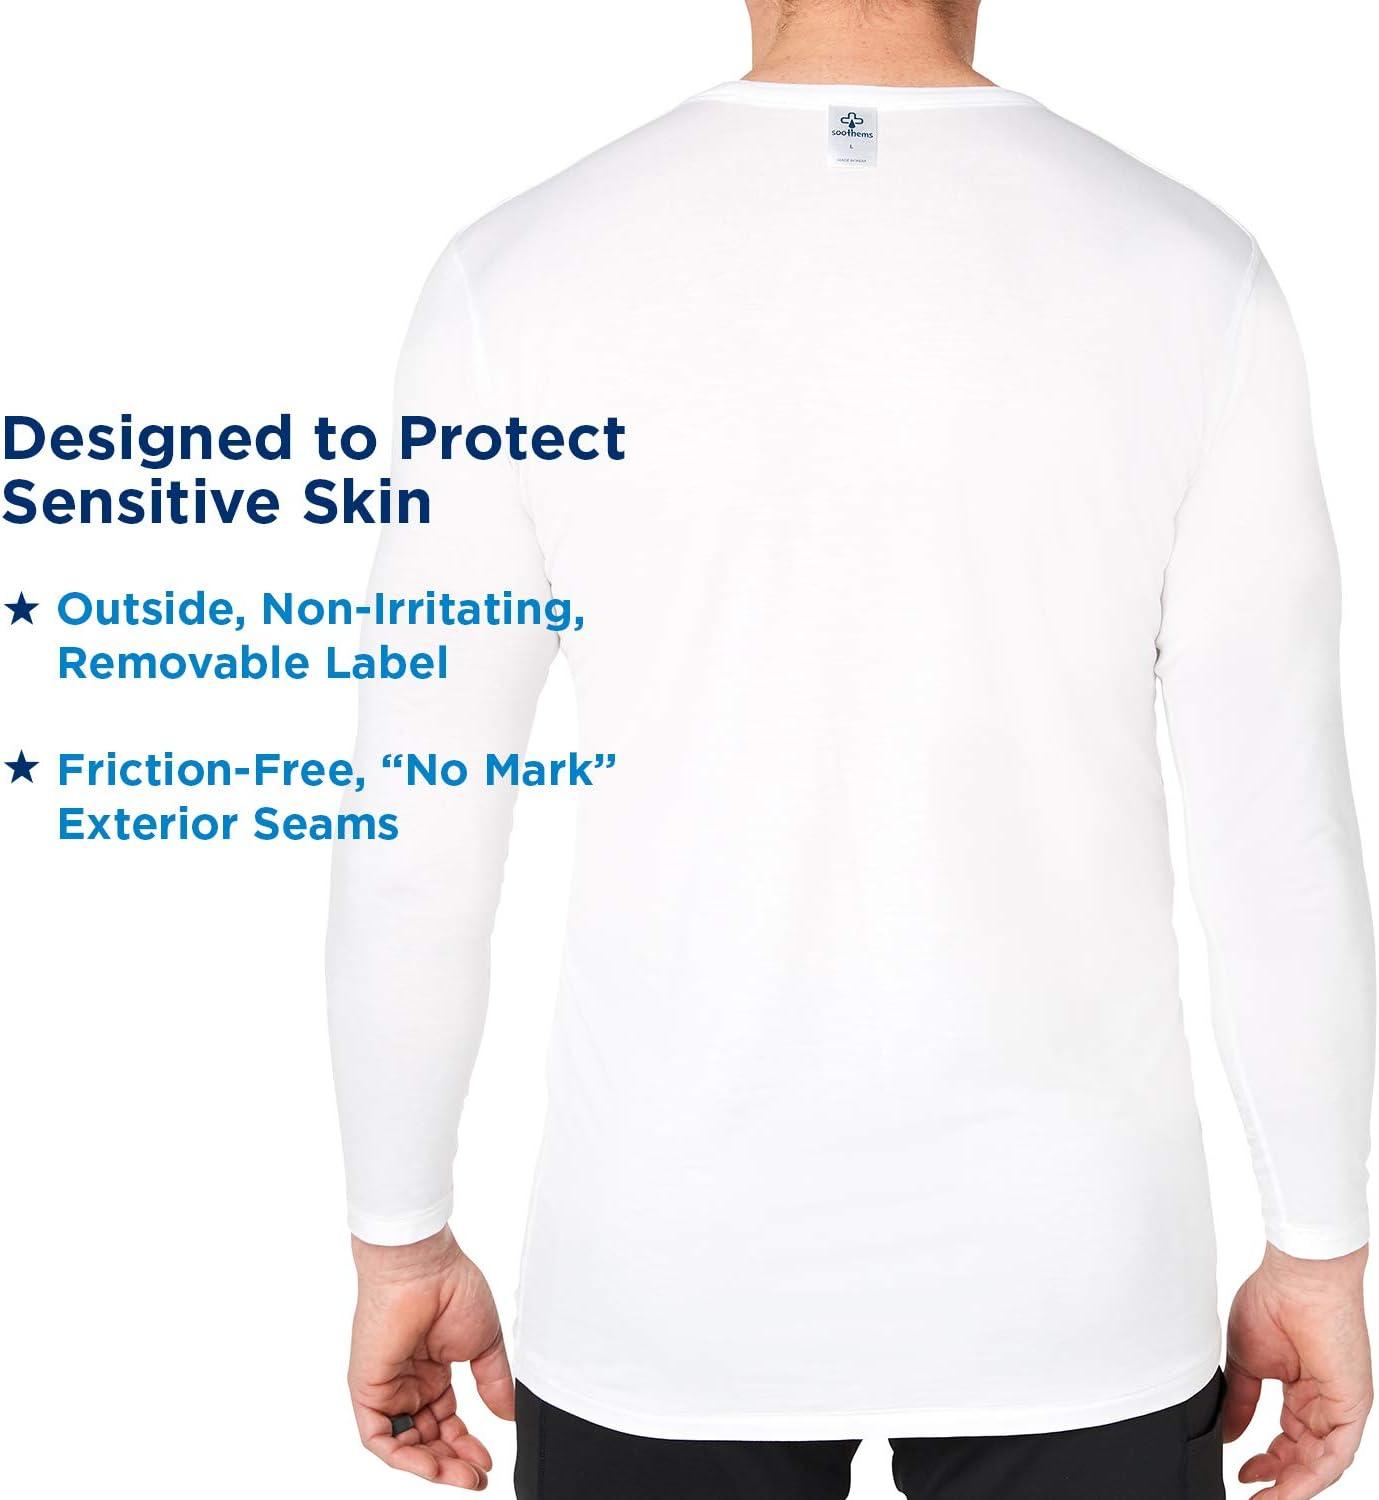 Ladies Eczema and Psoriasis Treatment Shirt - Soothems